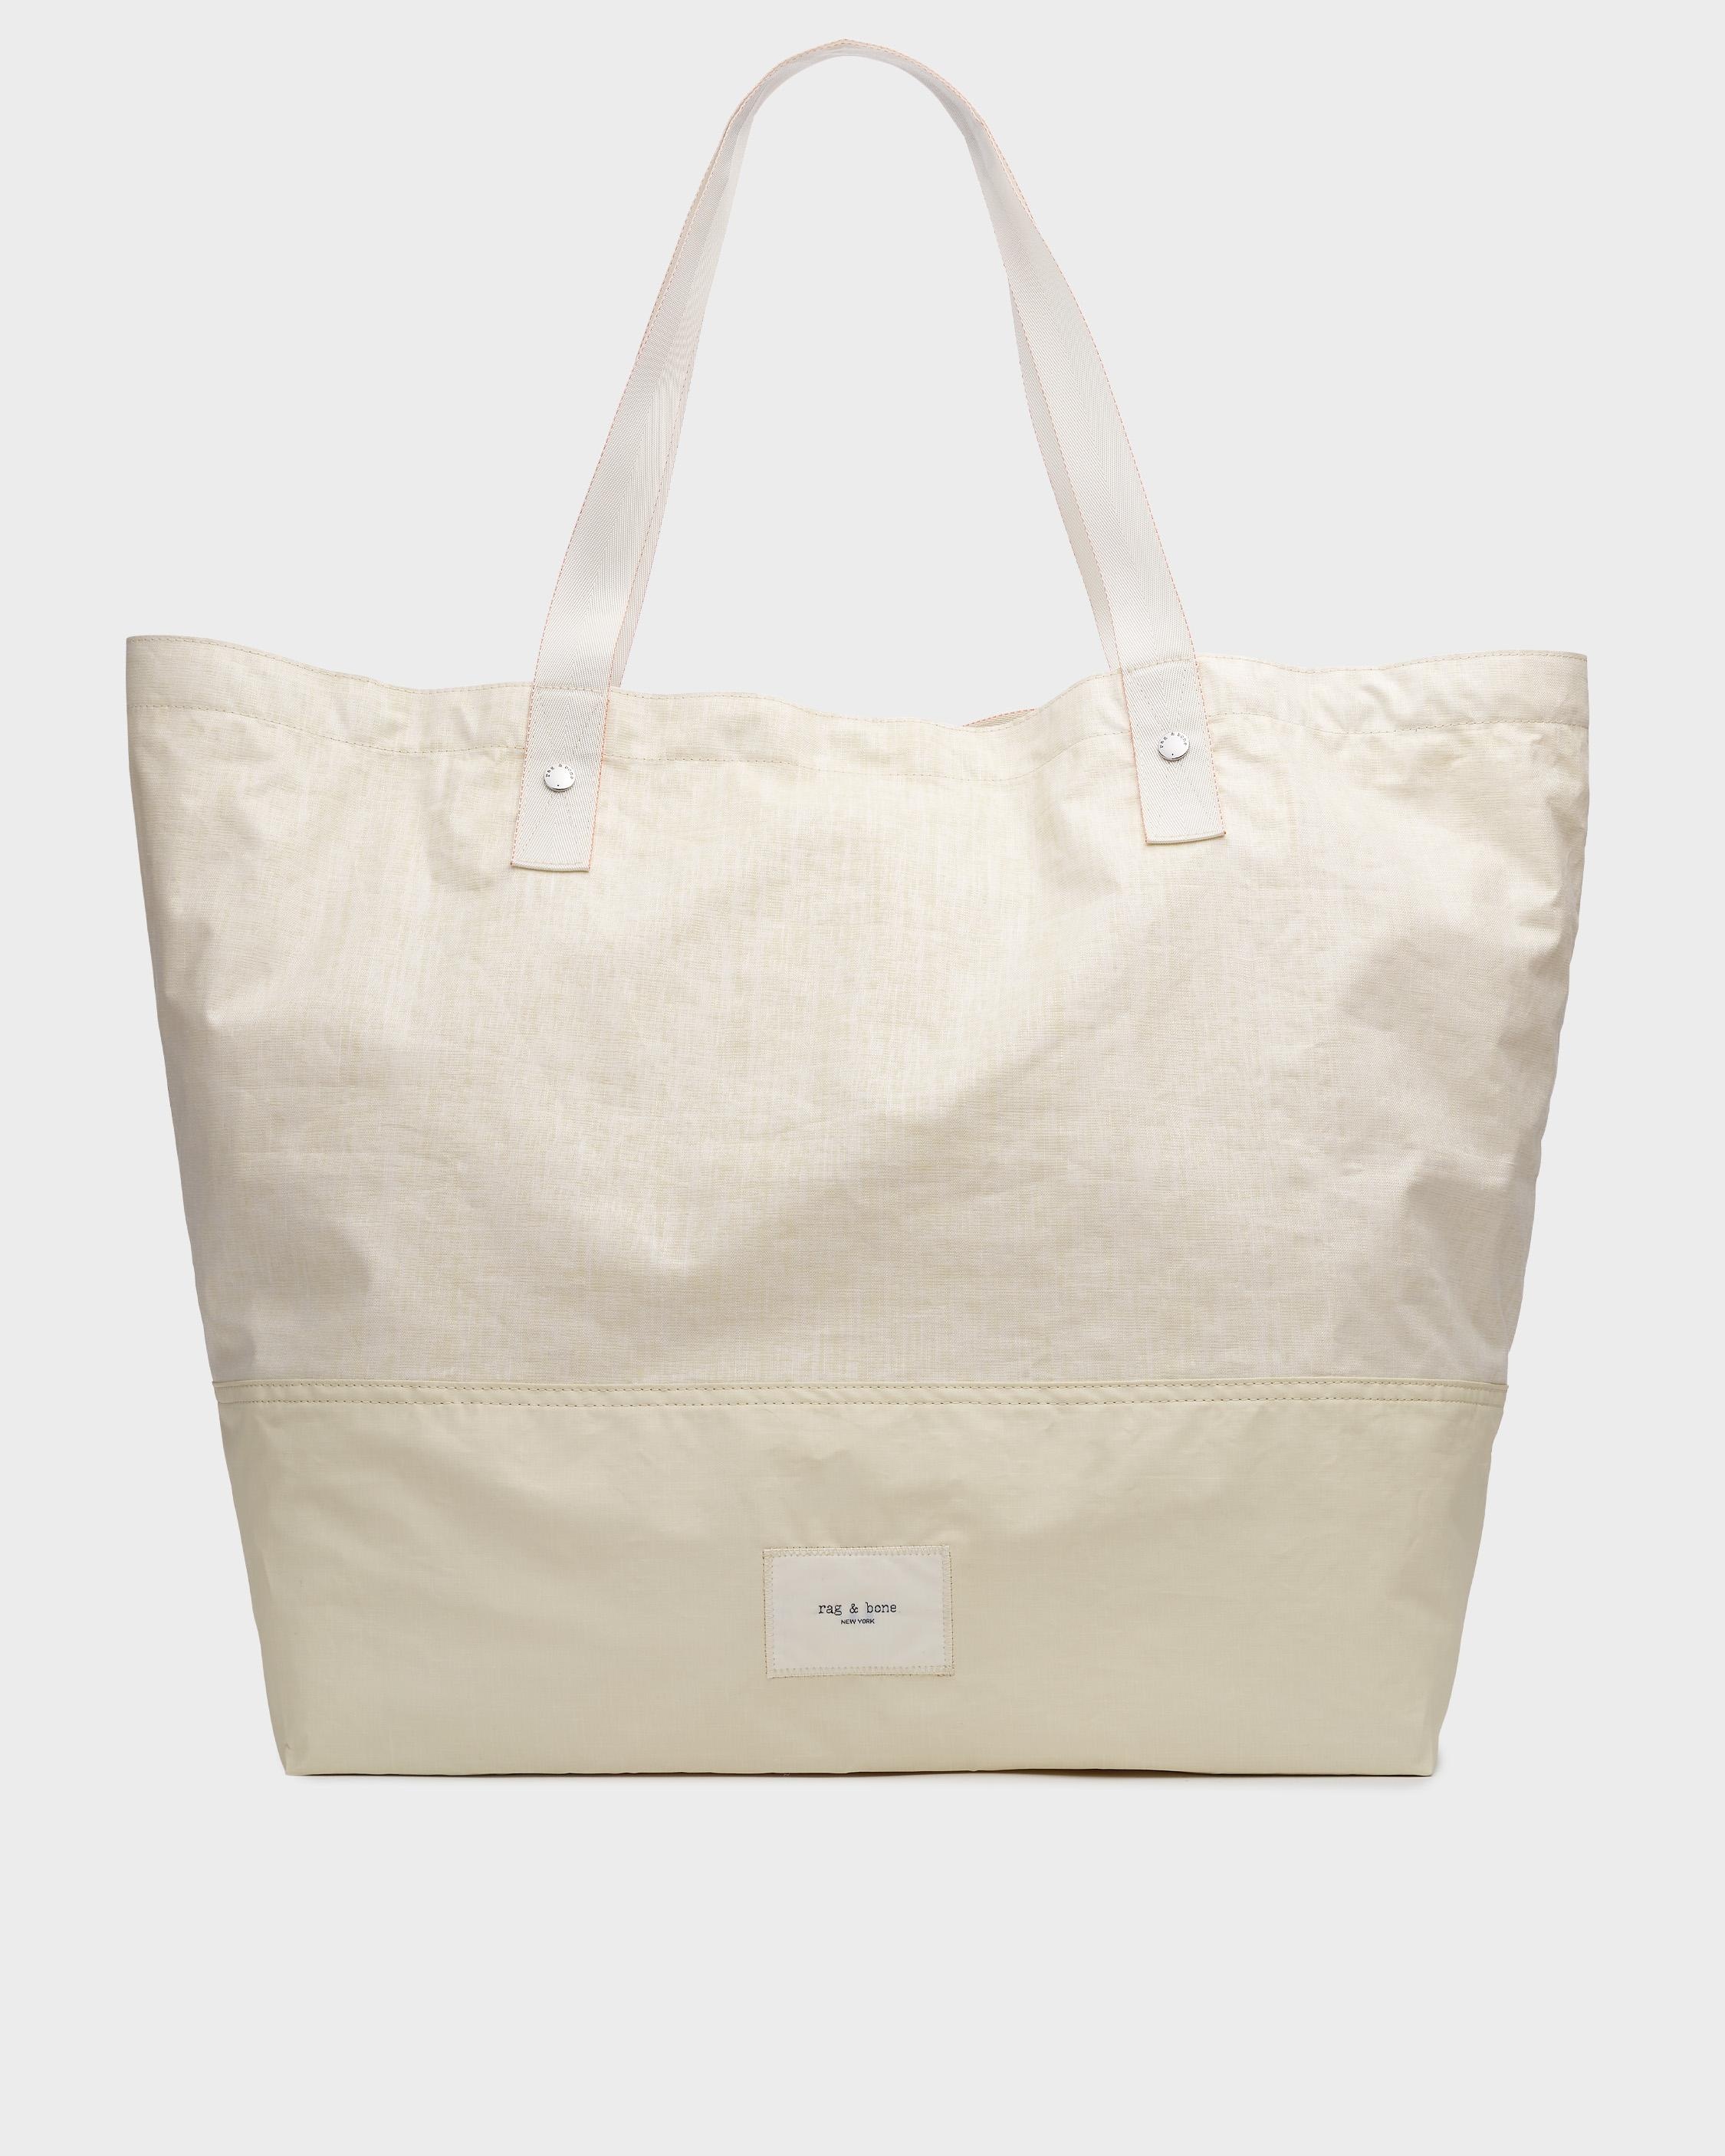 Addison Oversized Tote - Linen
Extra Large Tote - 1